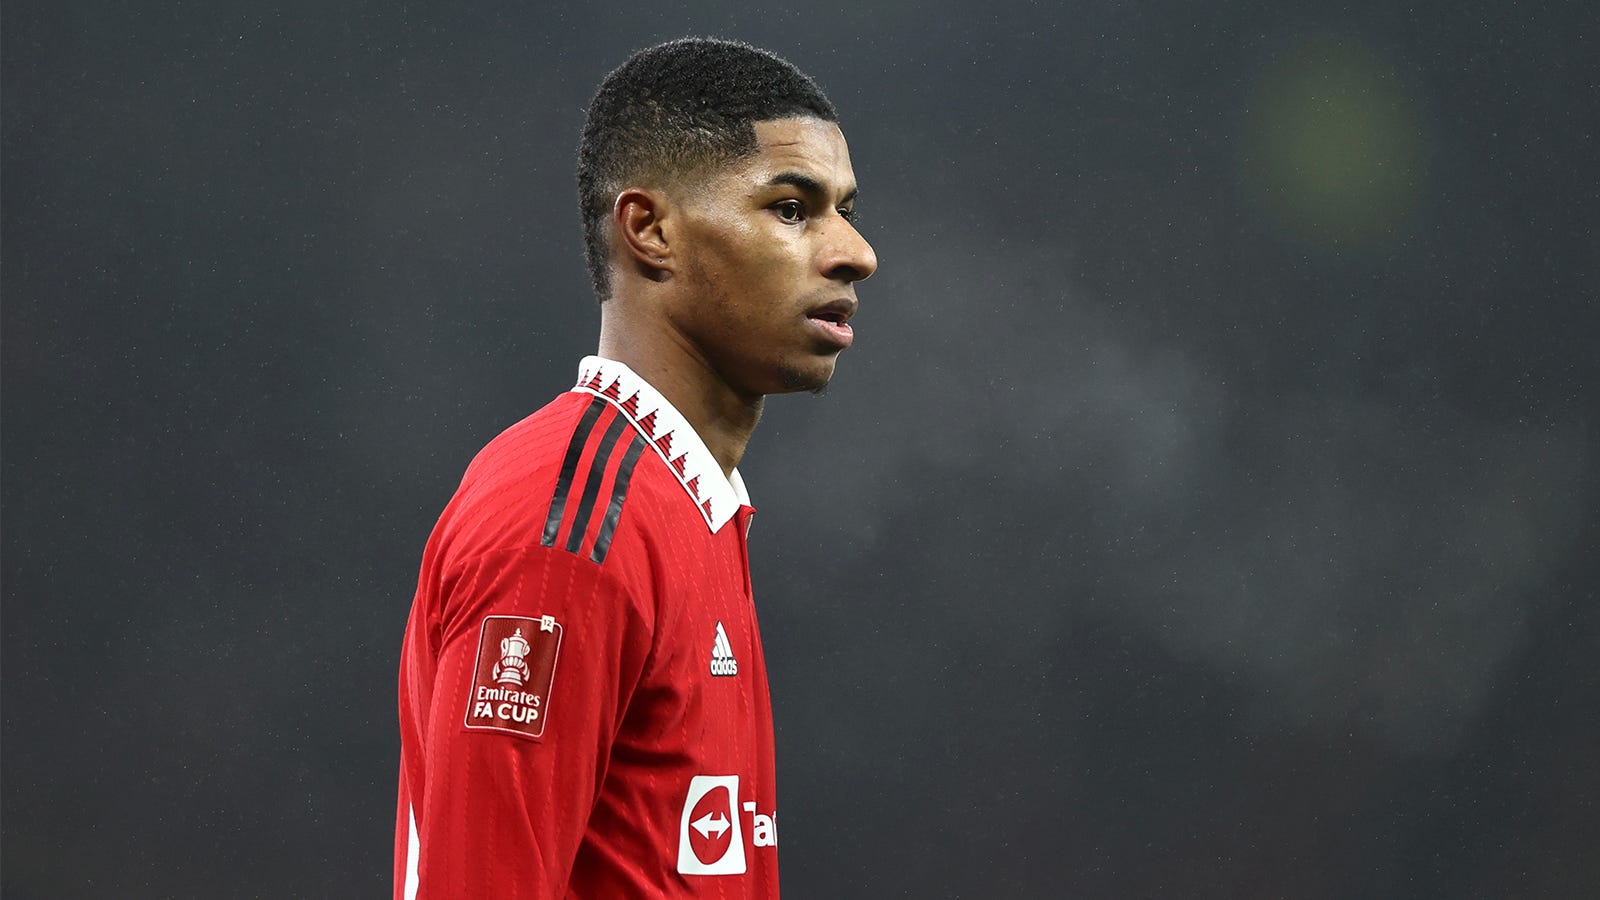 'VAR got the better of me again' - Marcus Rashford furious after missing out on Man Utd record